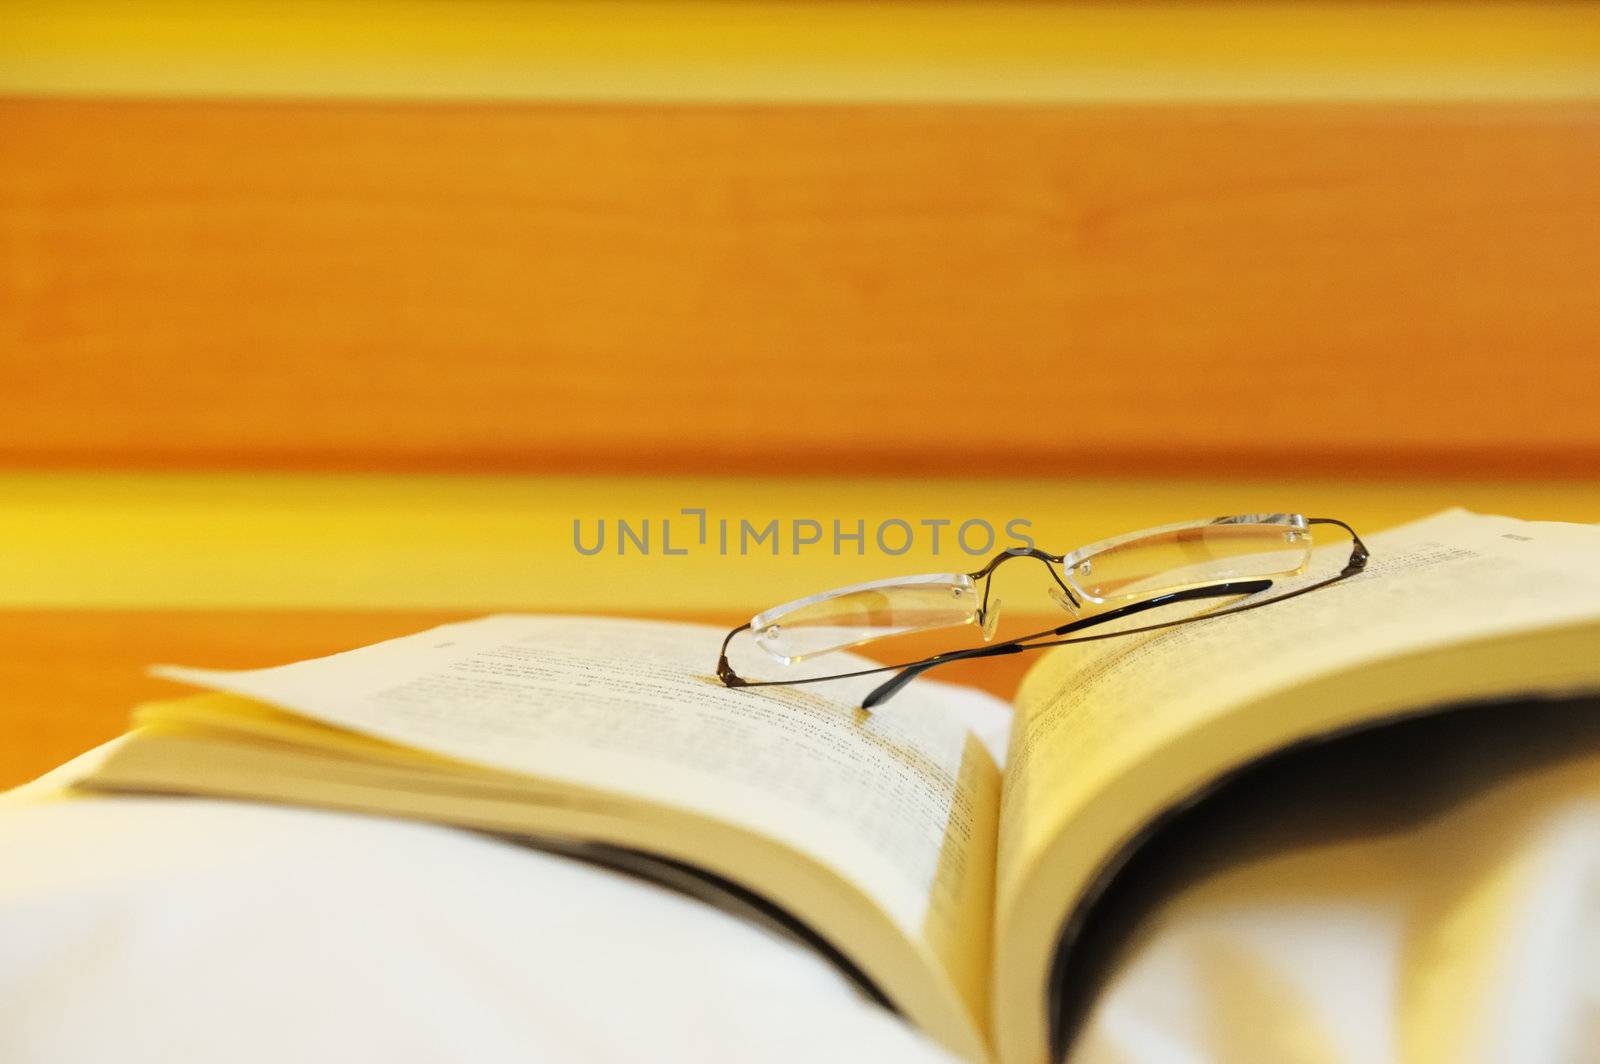 Book and glasses on the bed